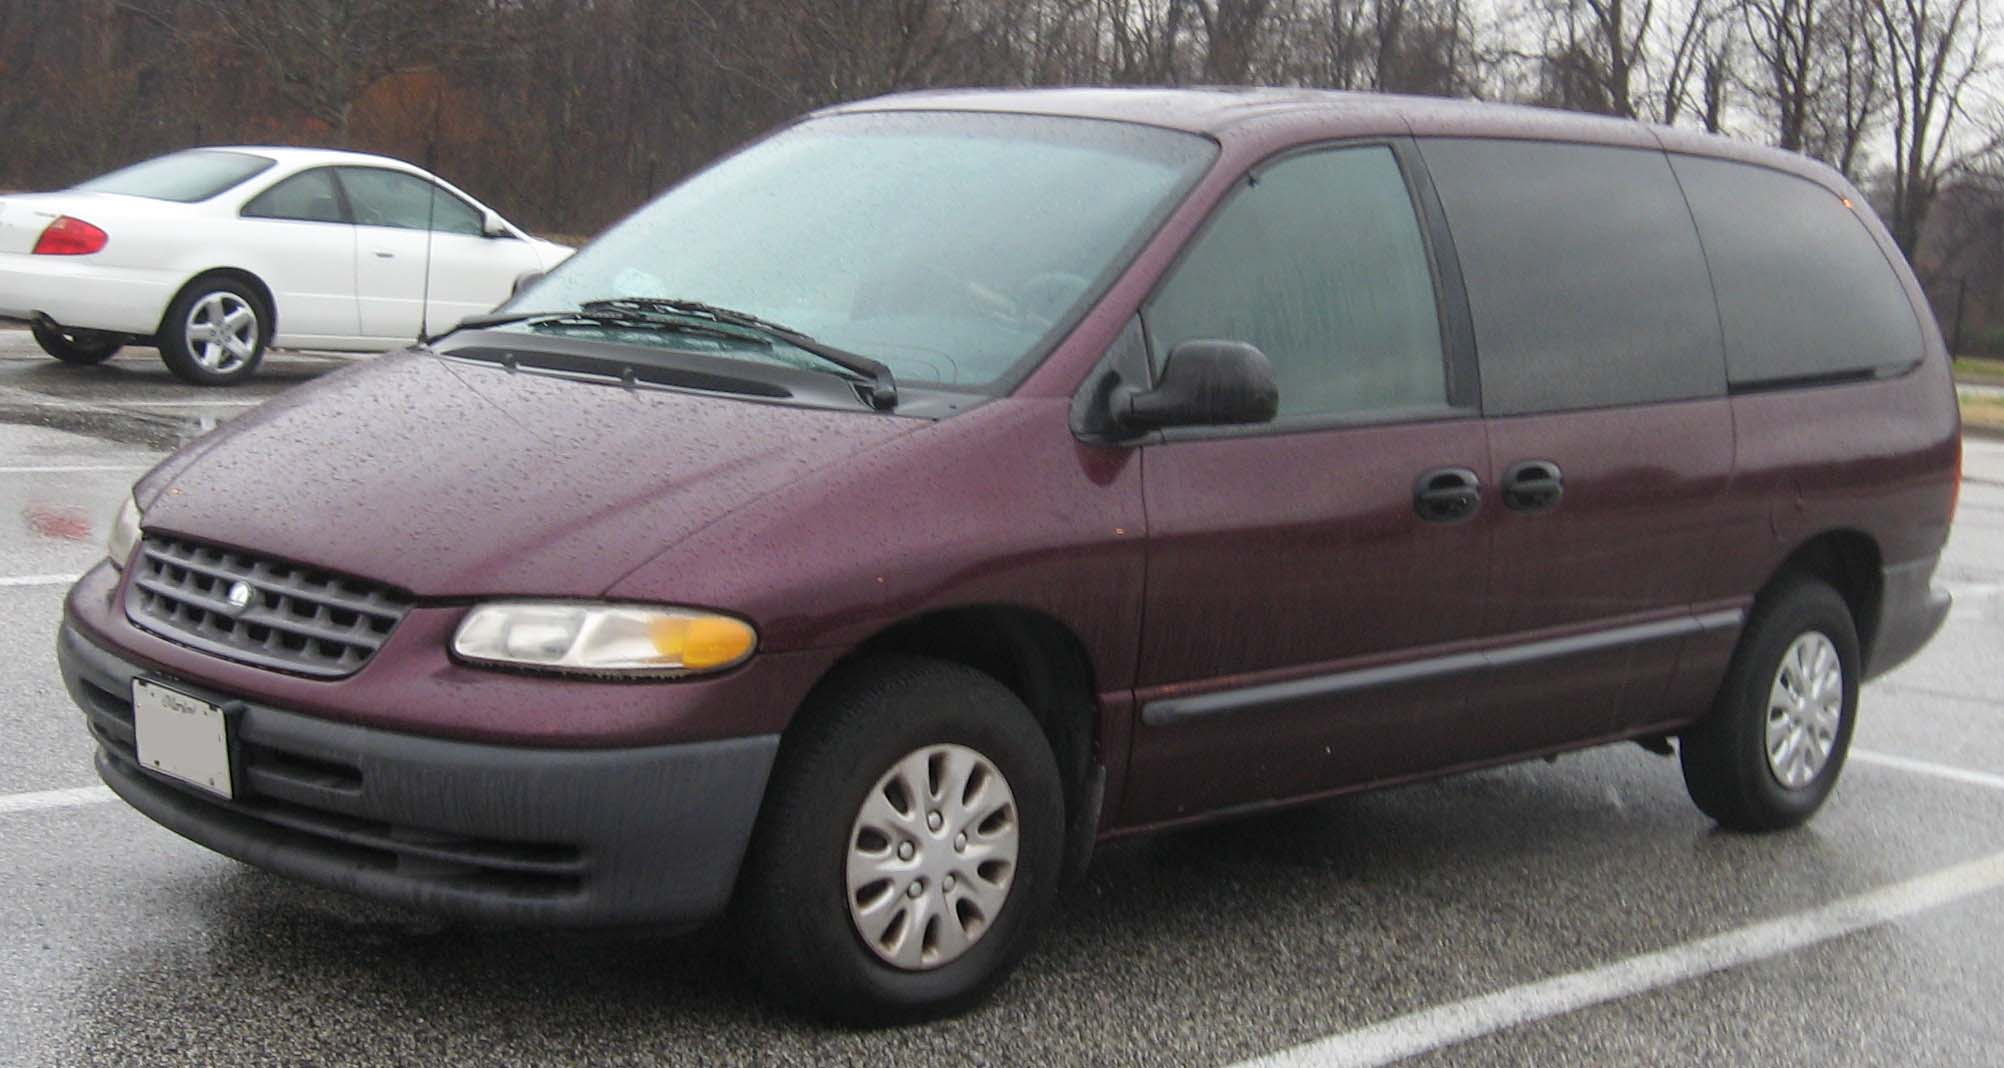 1996 plymouth voyager value